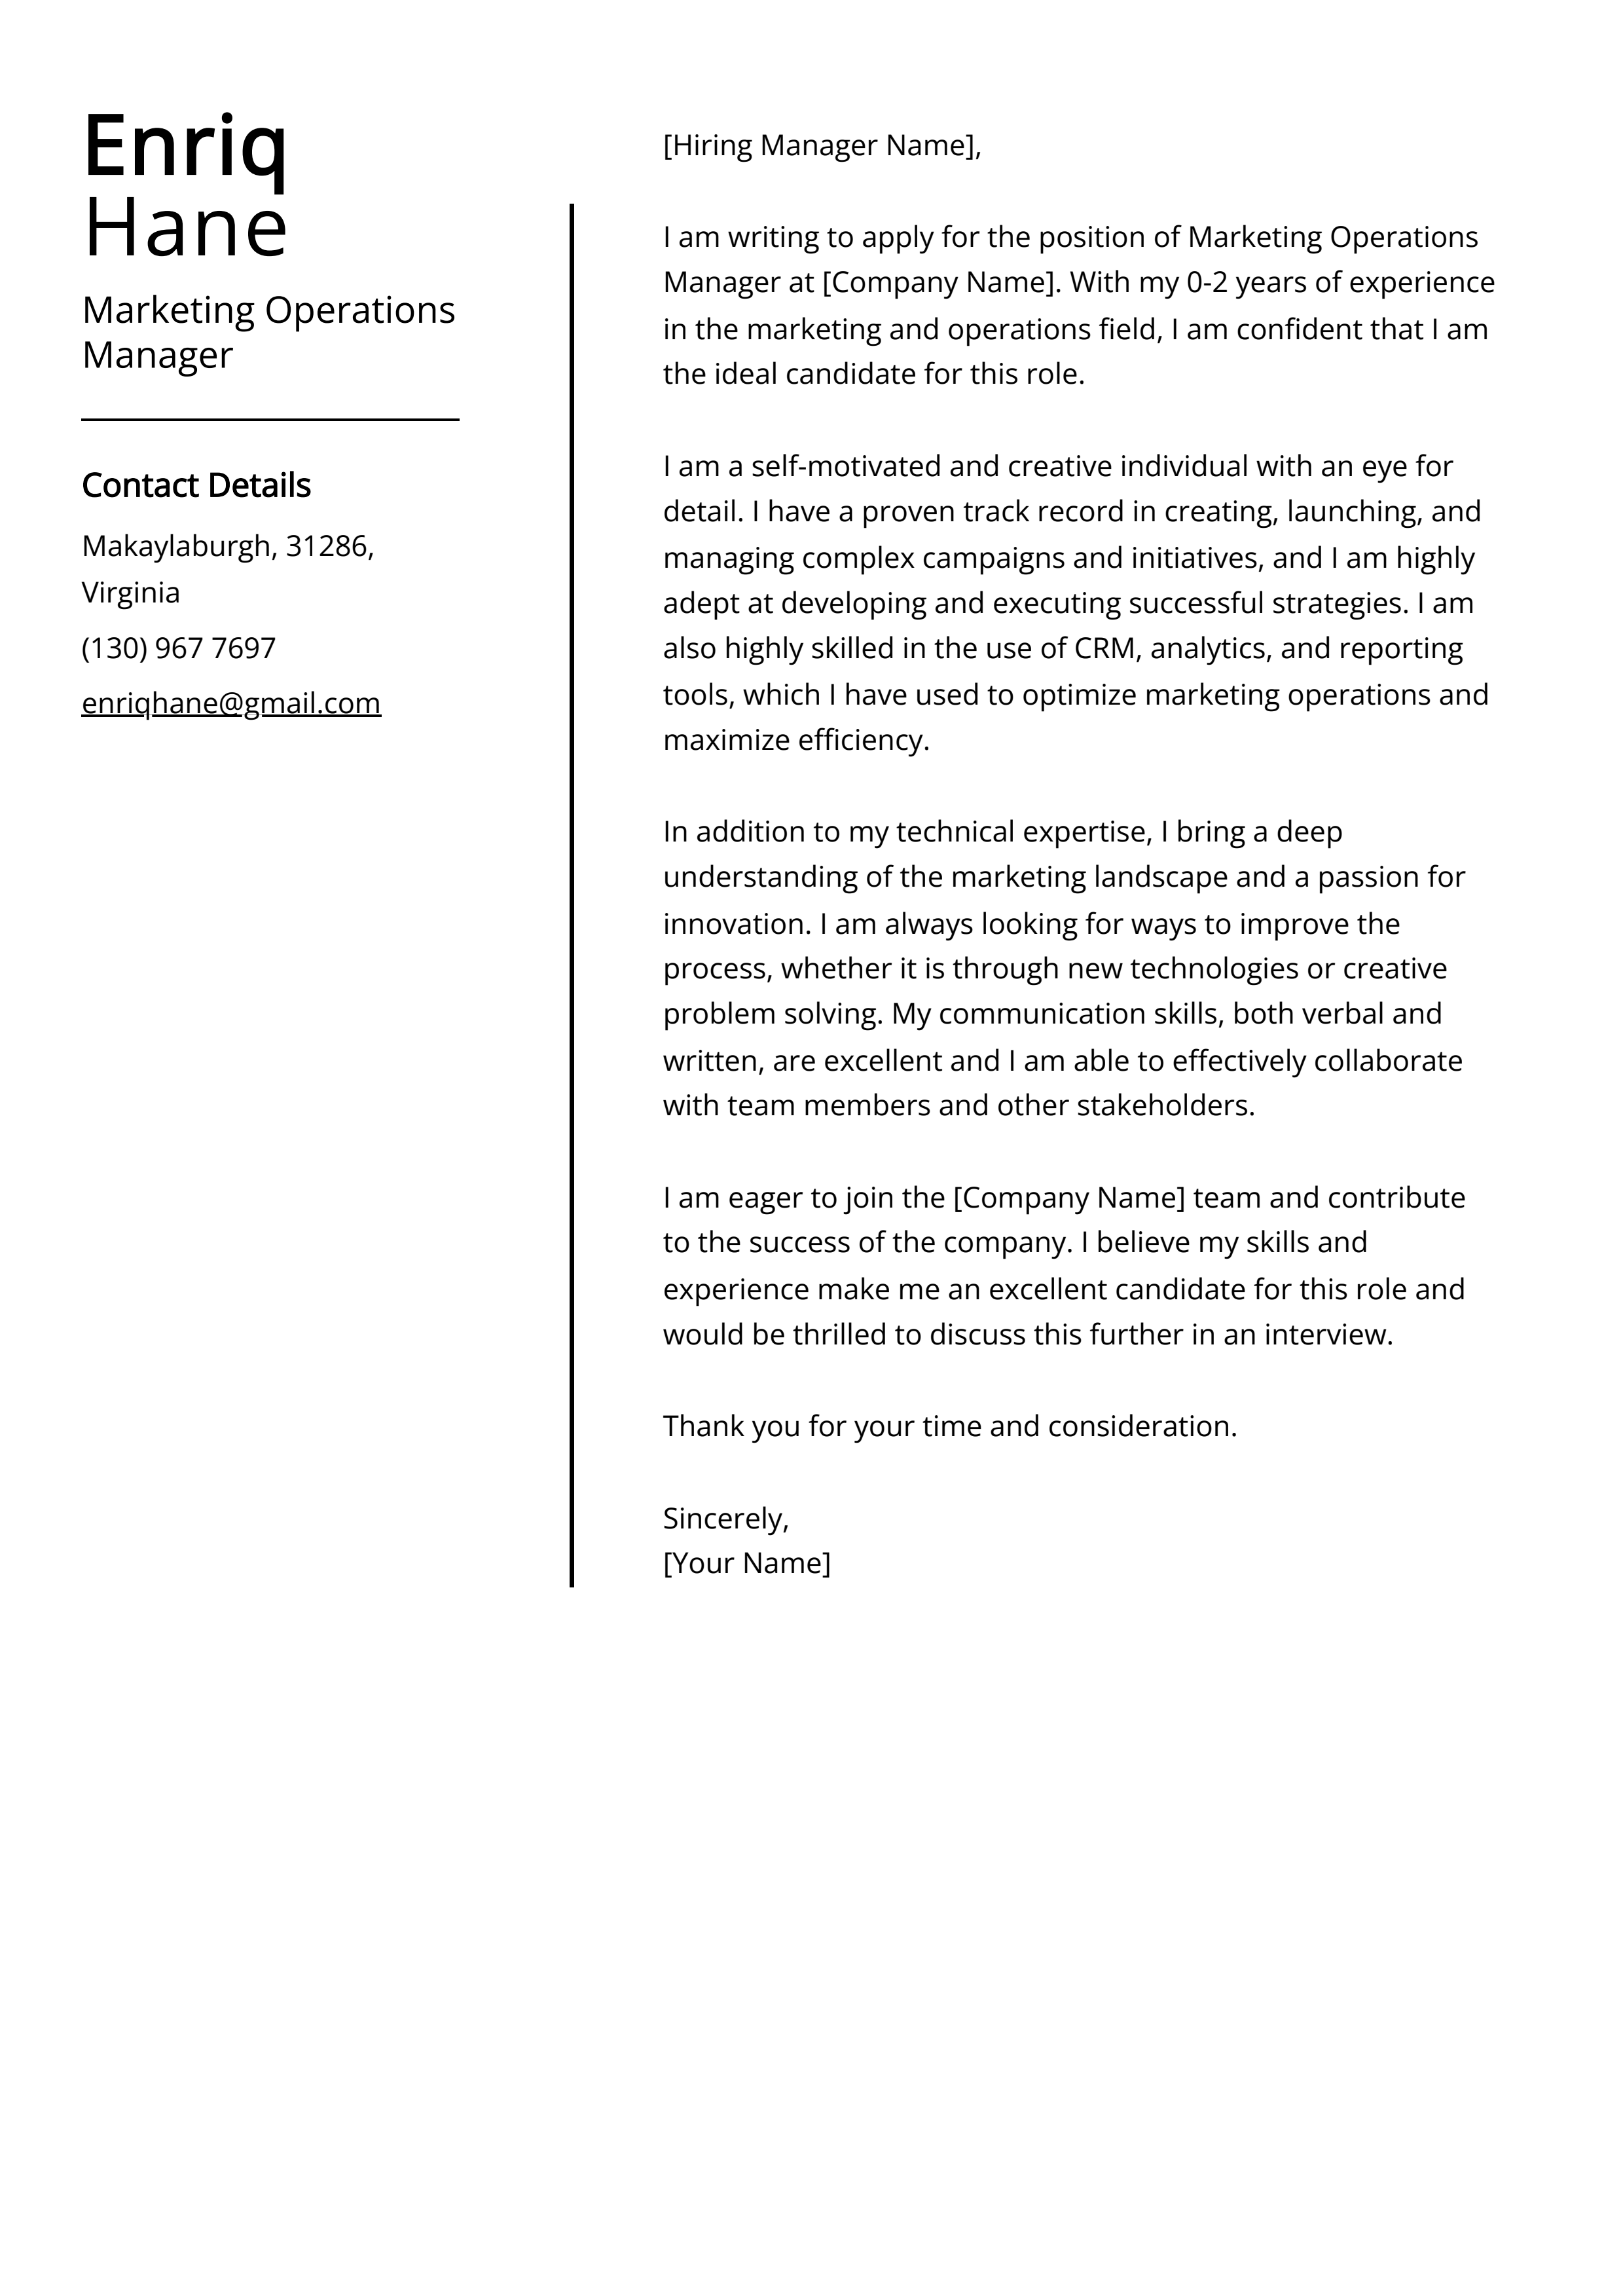 Marketing Operations Manager Cover Letter Example